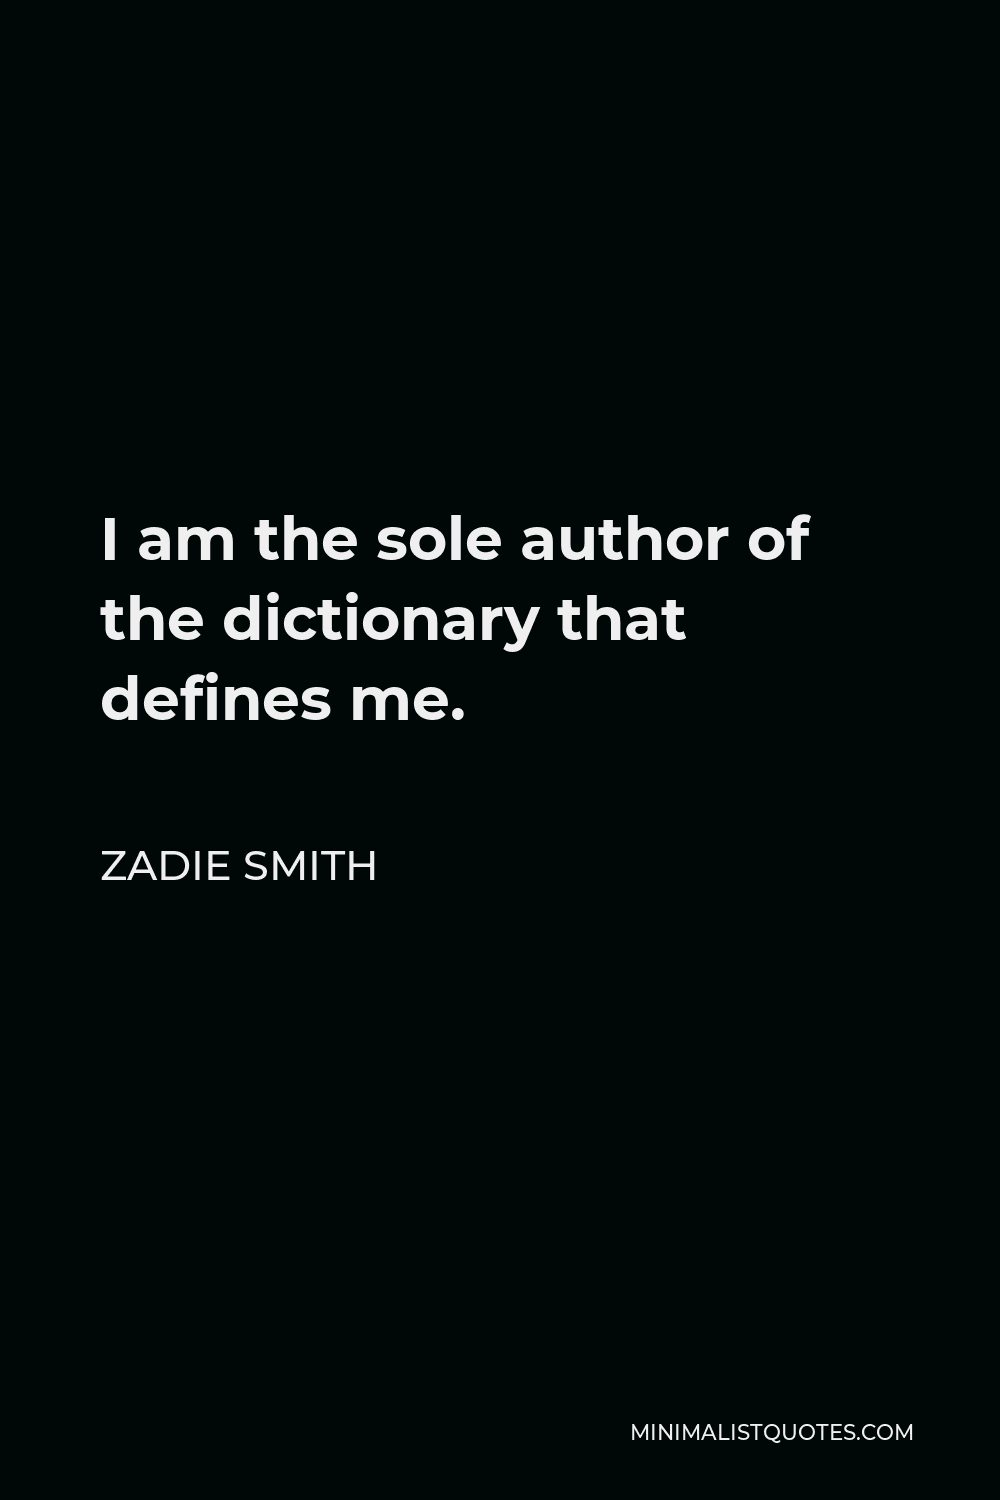 Zadie Smith Quote - I am the sole author of the dictionary that defines me.